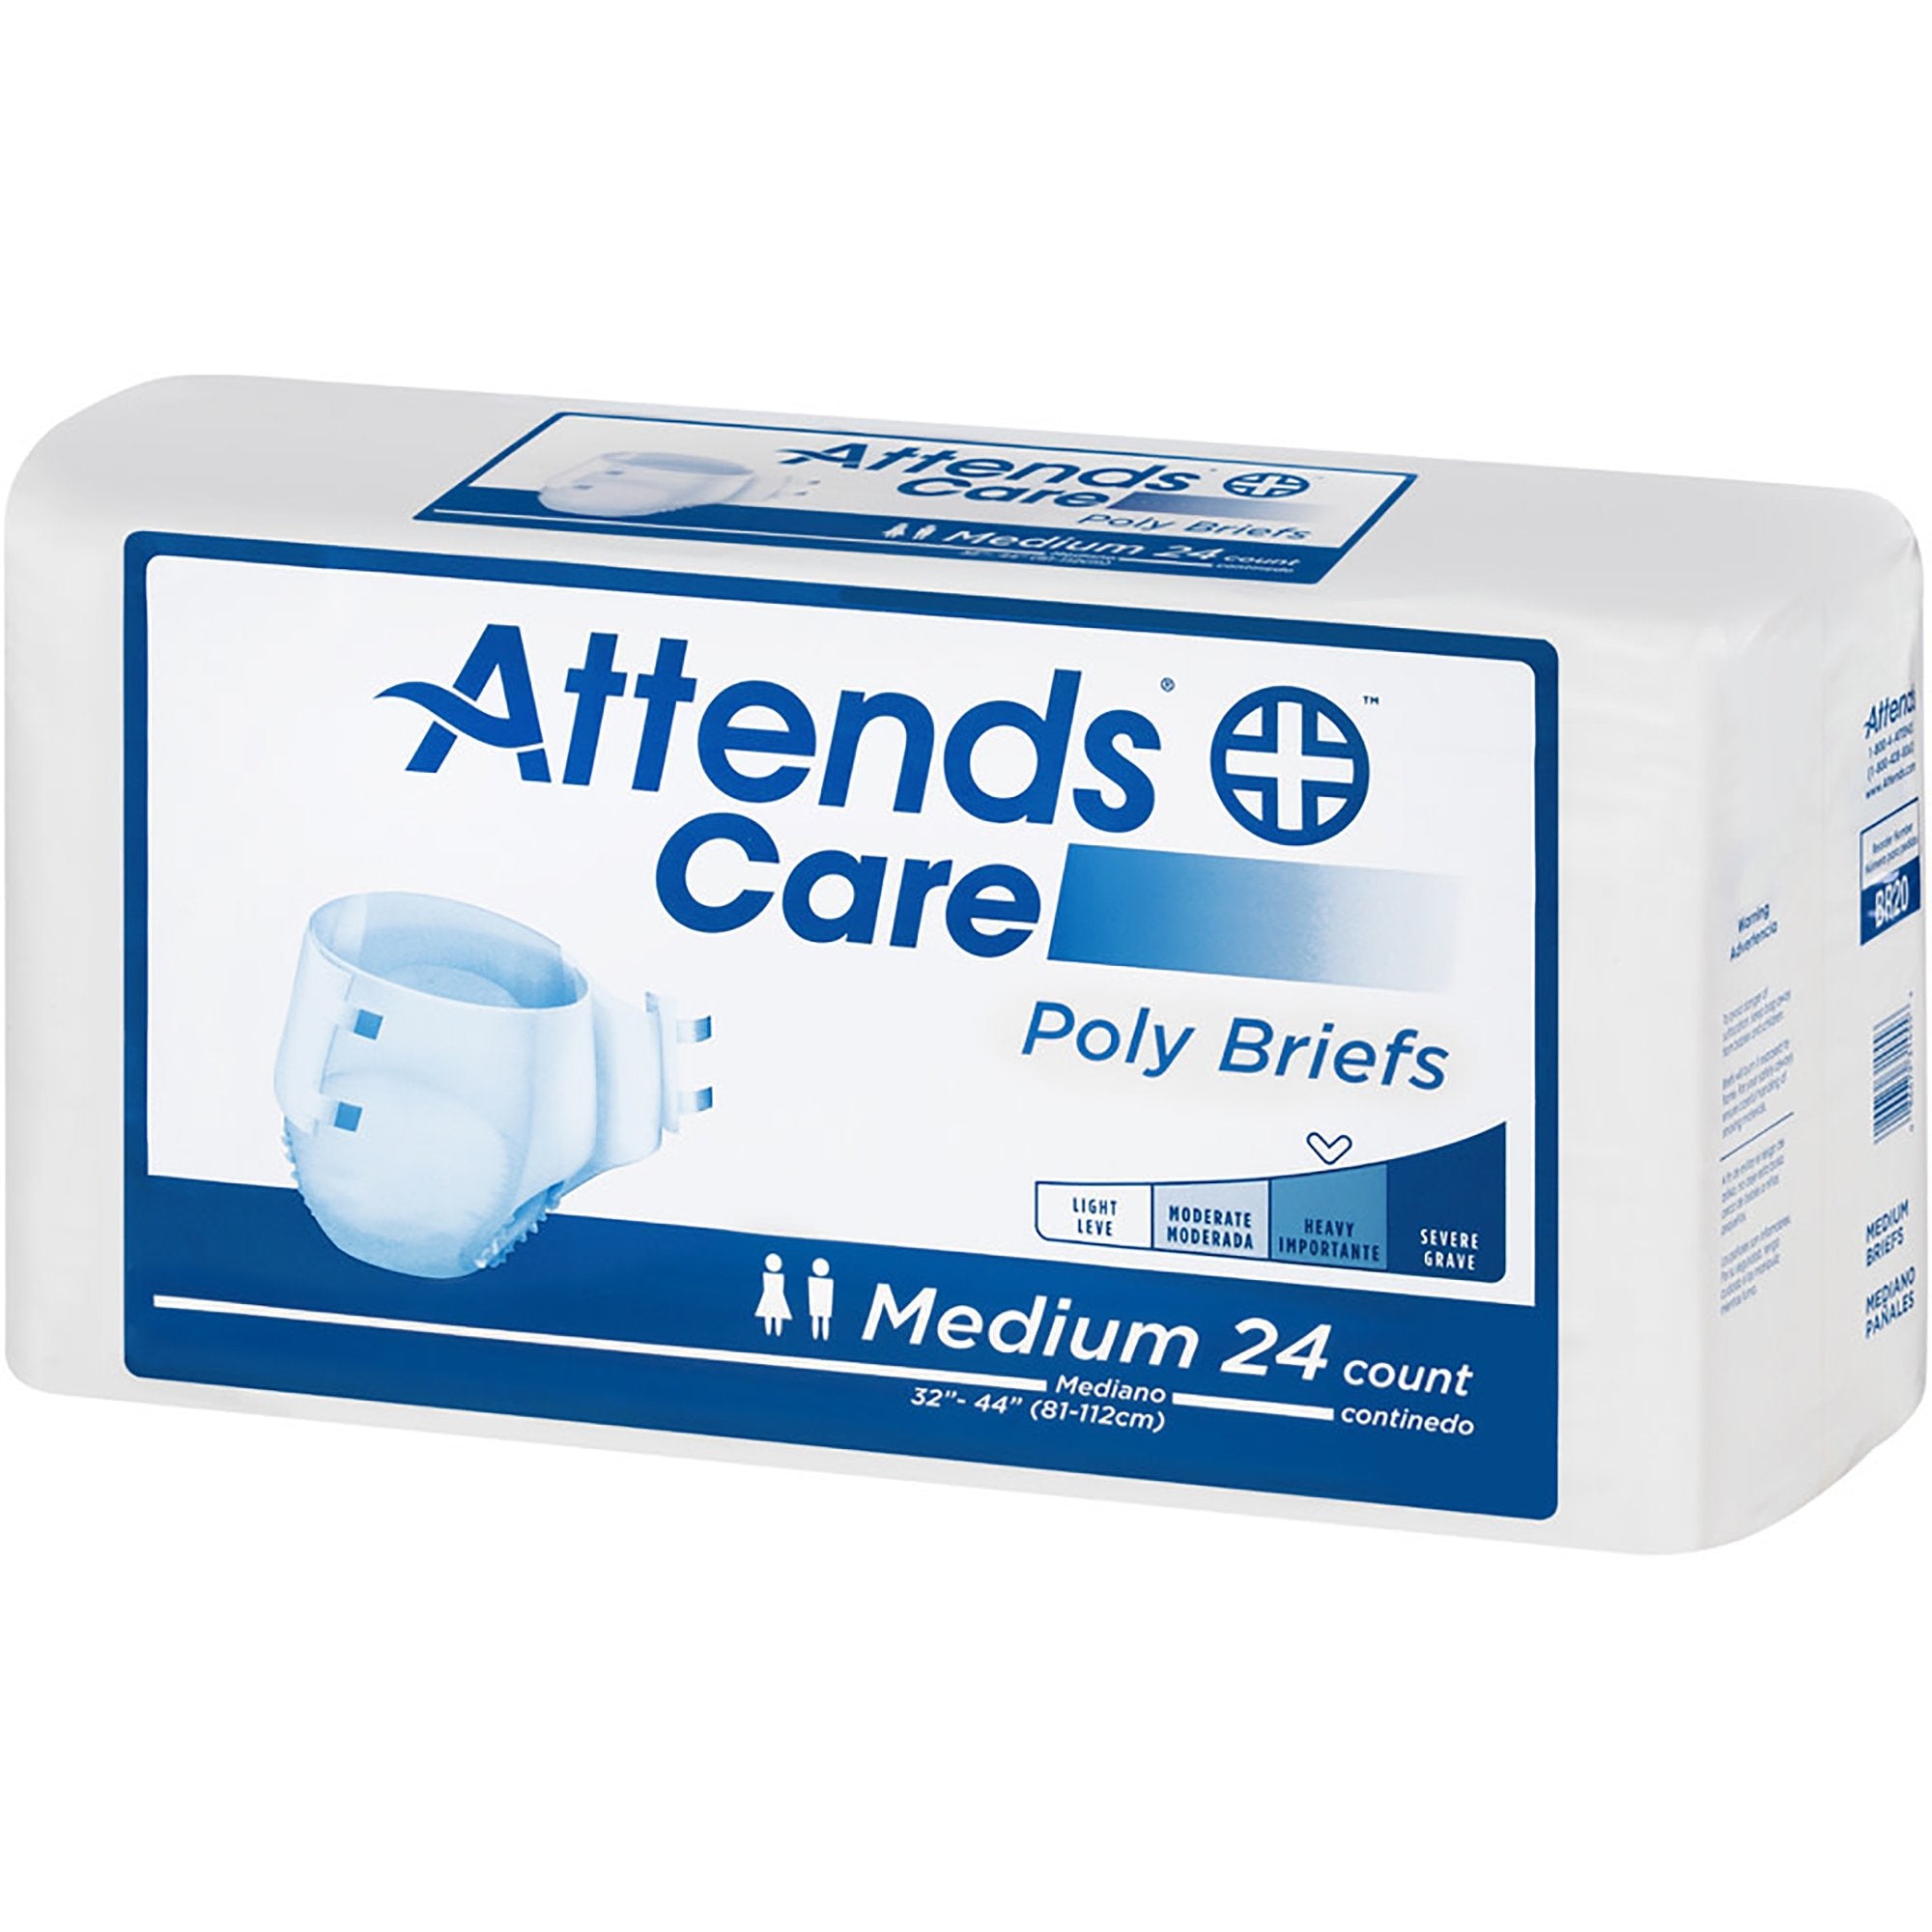 Unisex Adult Incontinence Brief Attends® Care Medium Disposable Moderate Absorbency